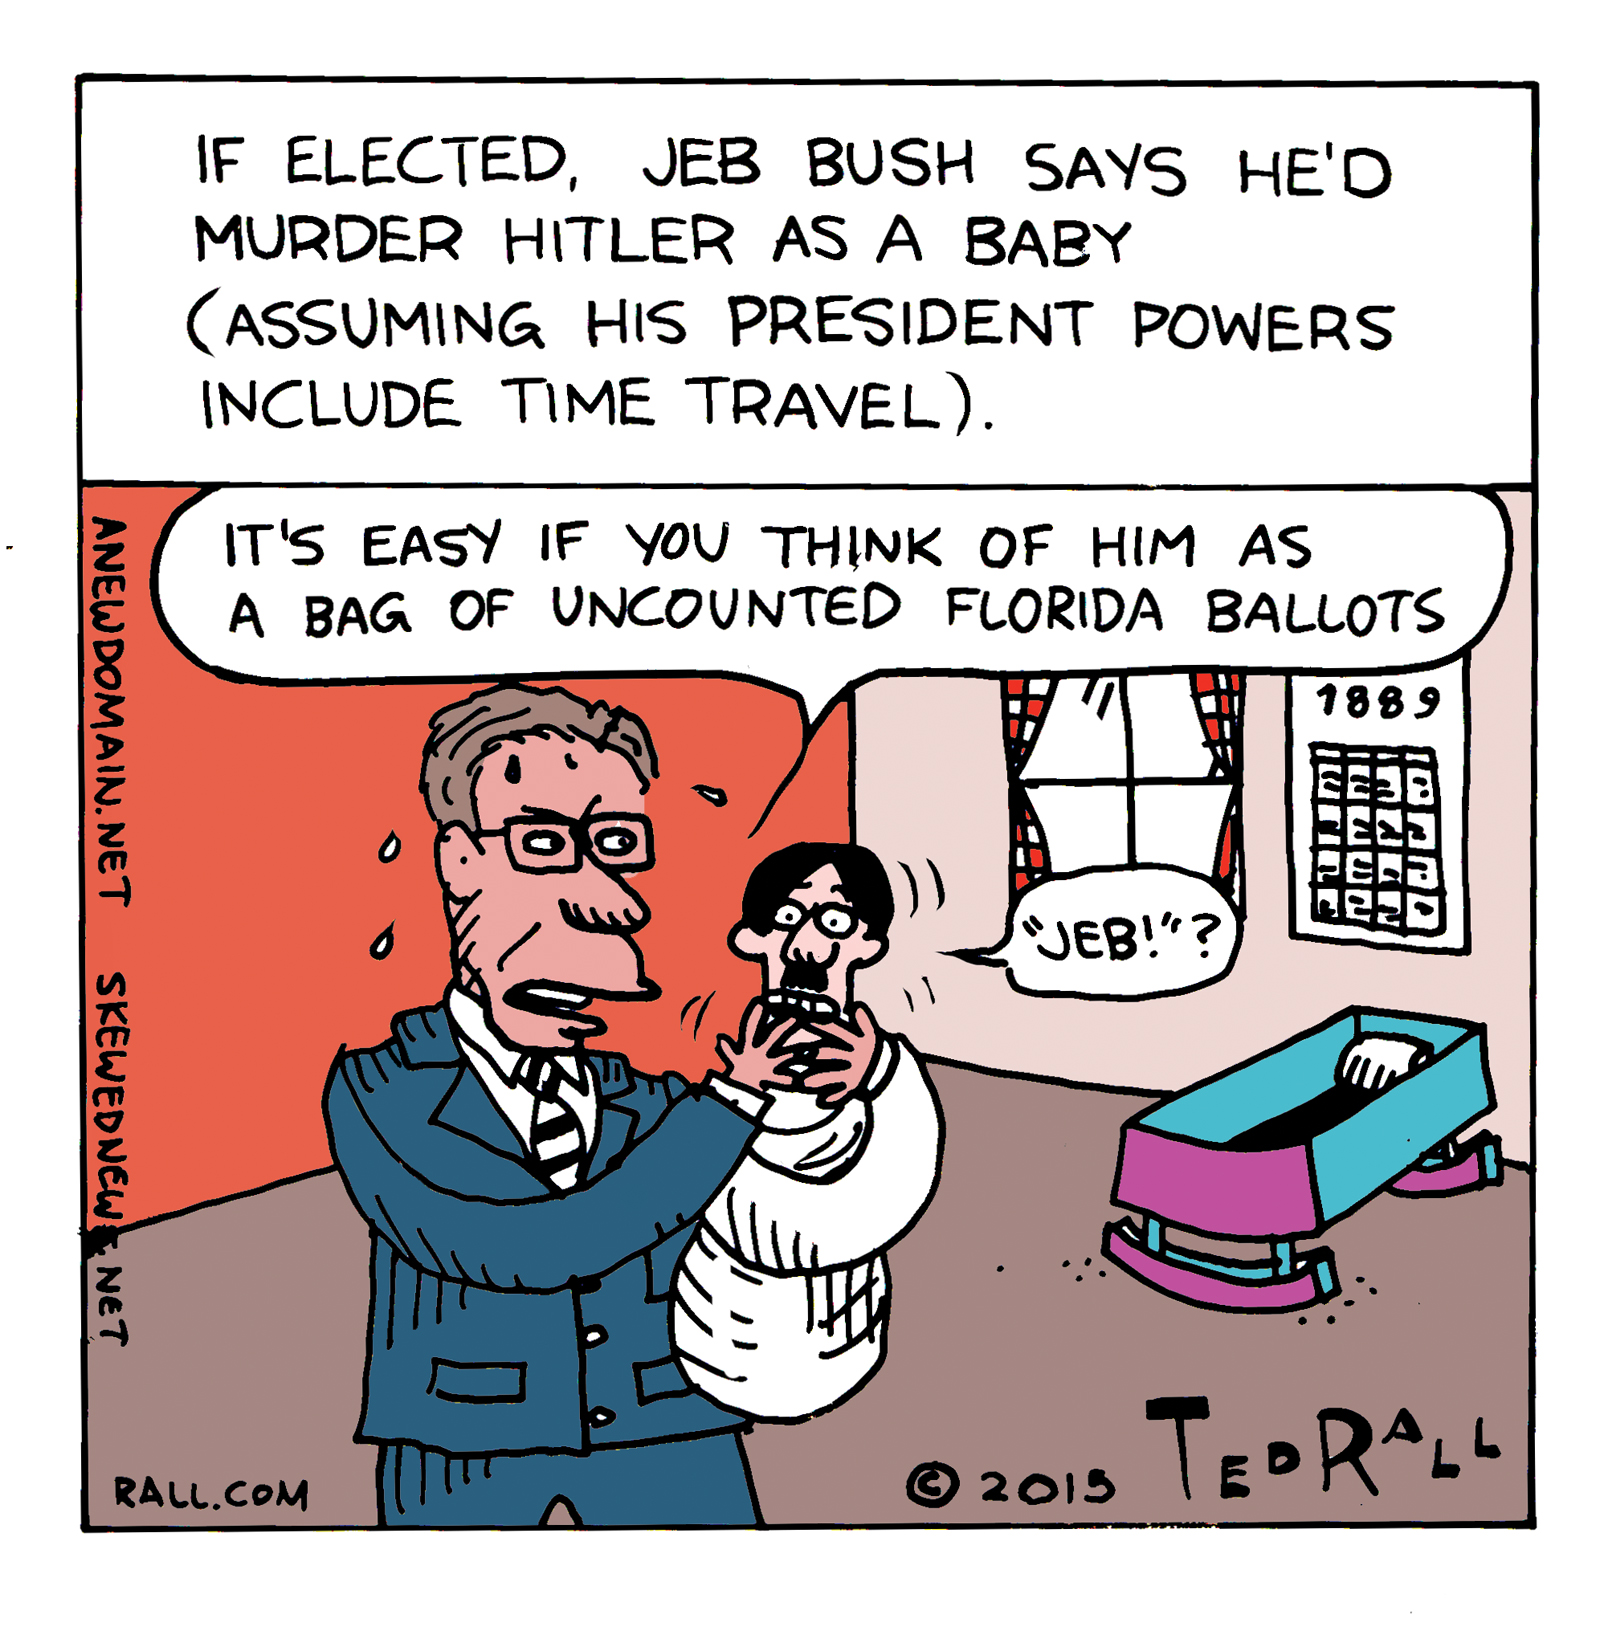 Jeb Bush says he'd murder Hitler as a baby.